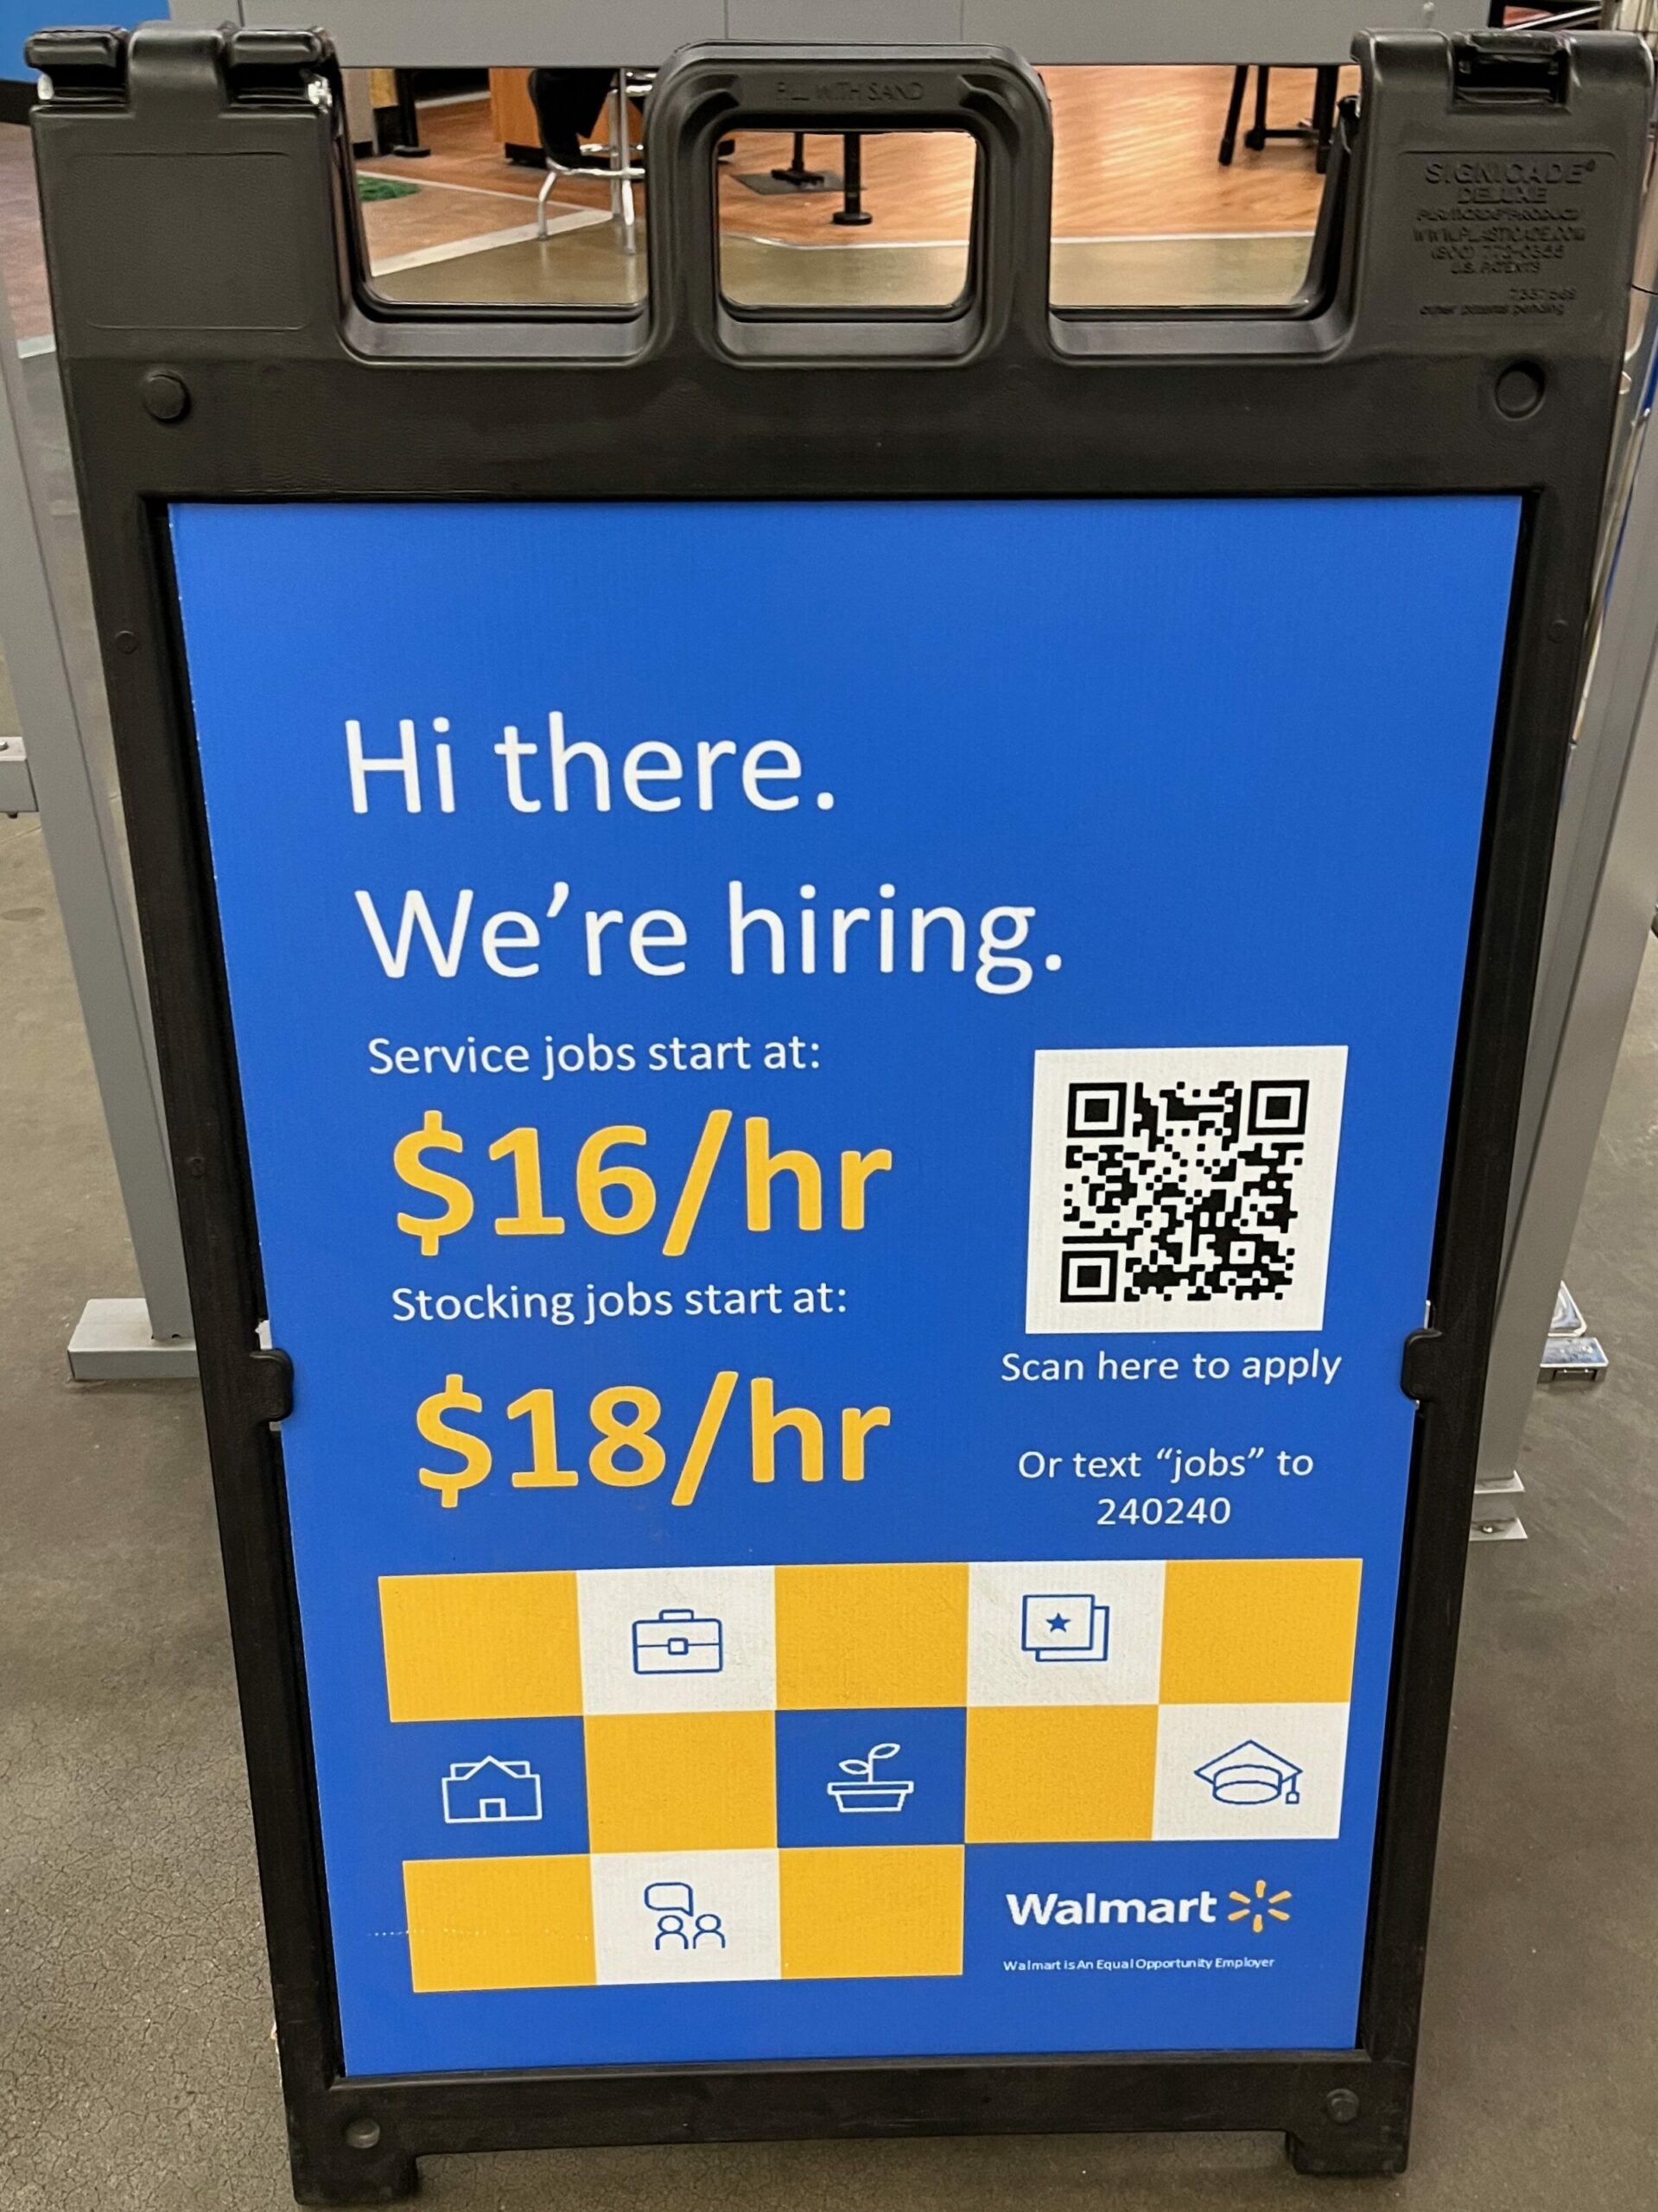 A Walmart sandwichboard style sign advertising service jobs starting at $16/hr and stocking jobs starting at $18/hr. It's located inside a Walmart store.